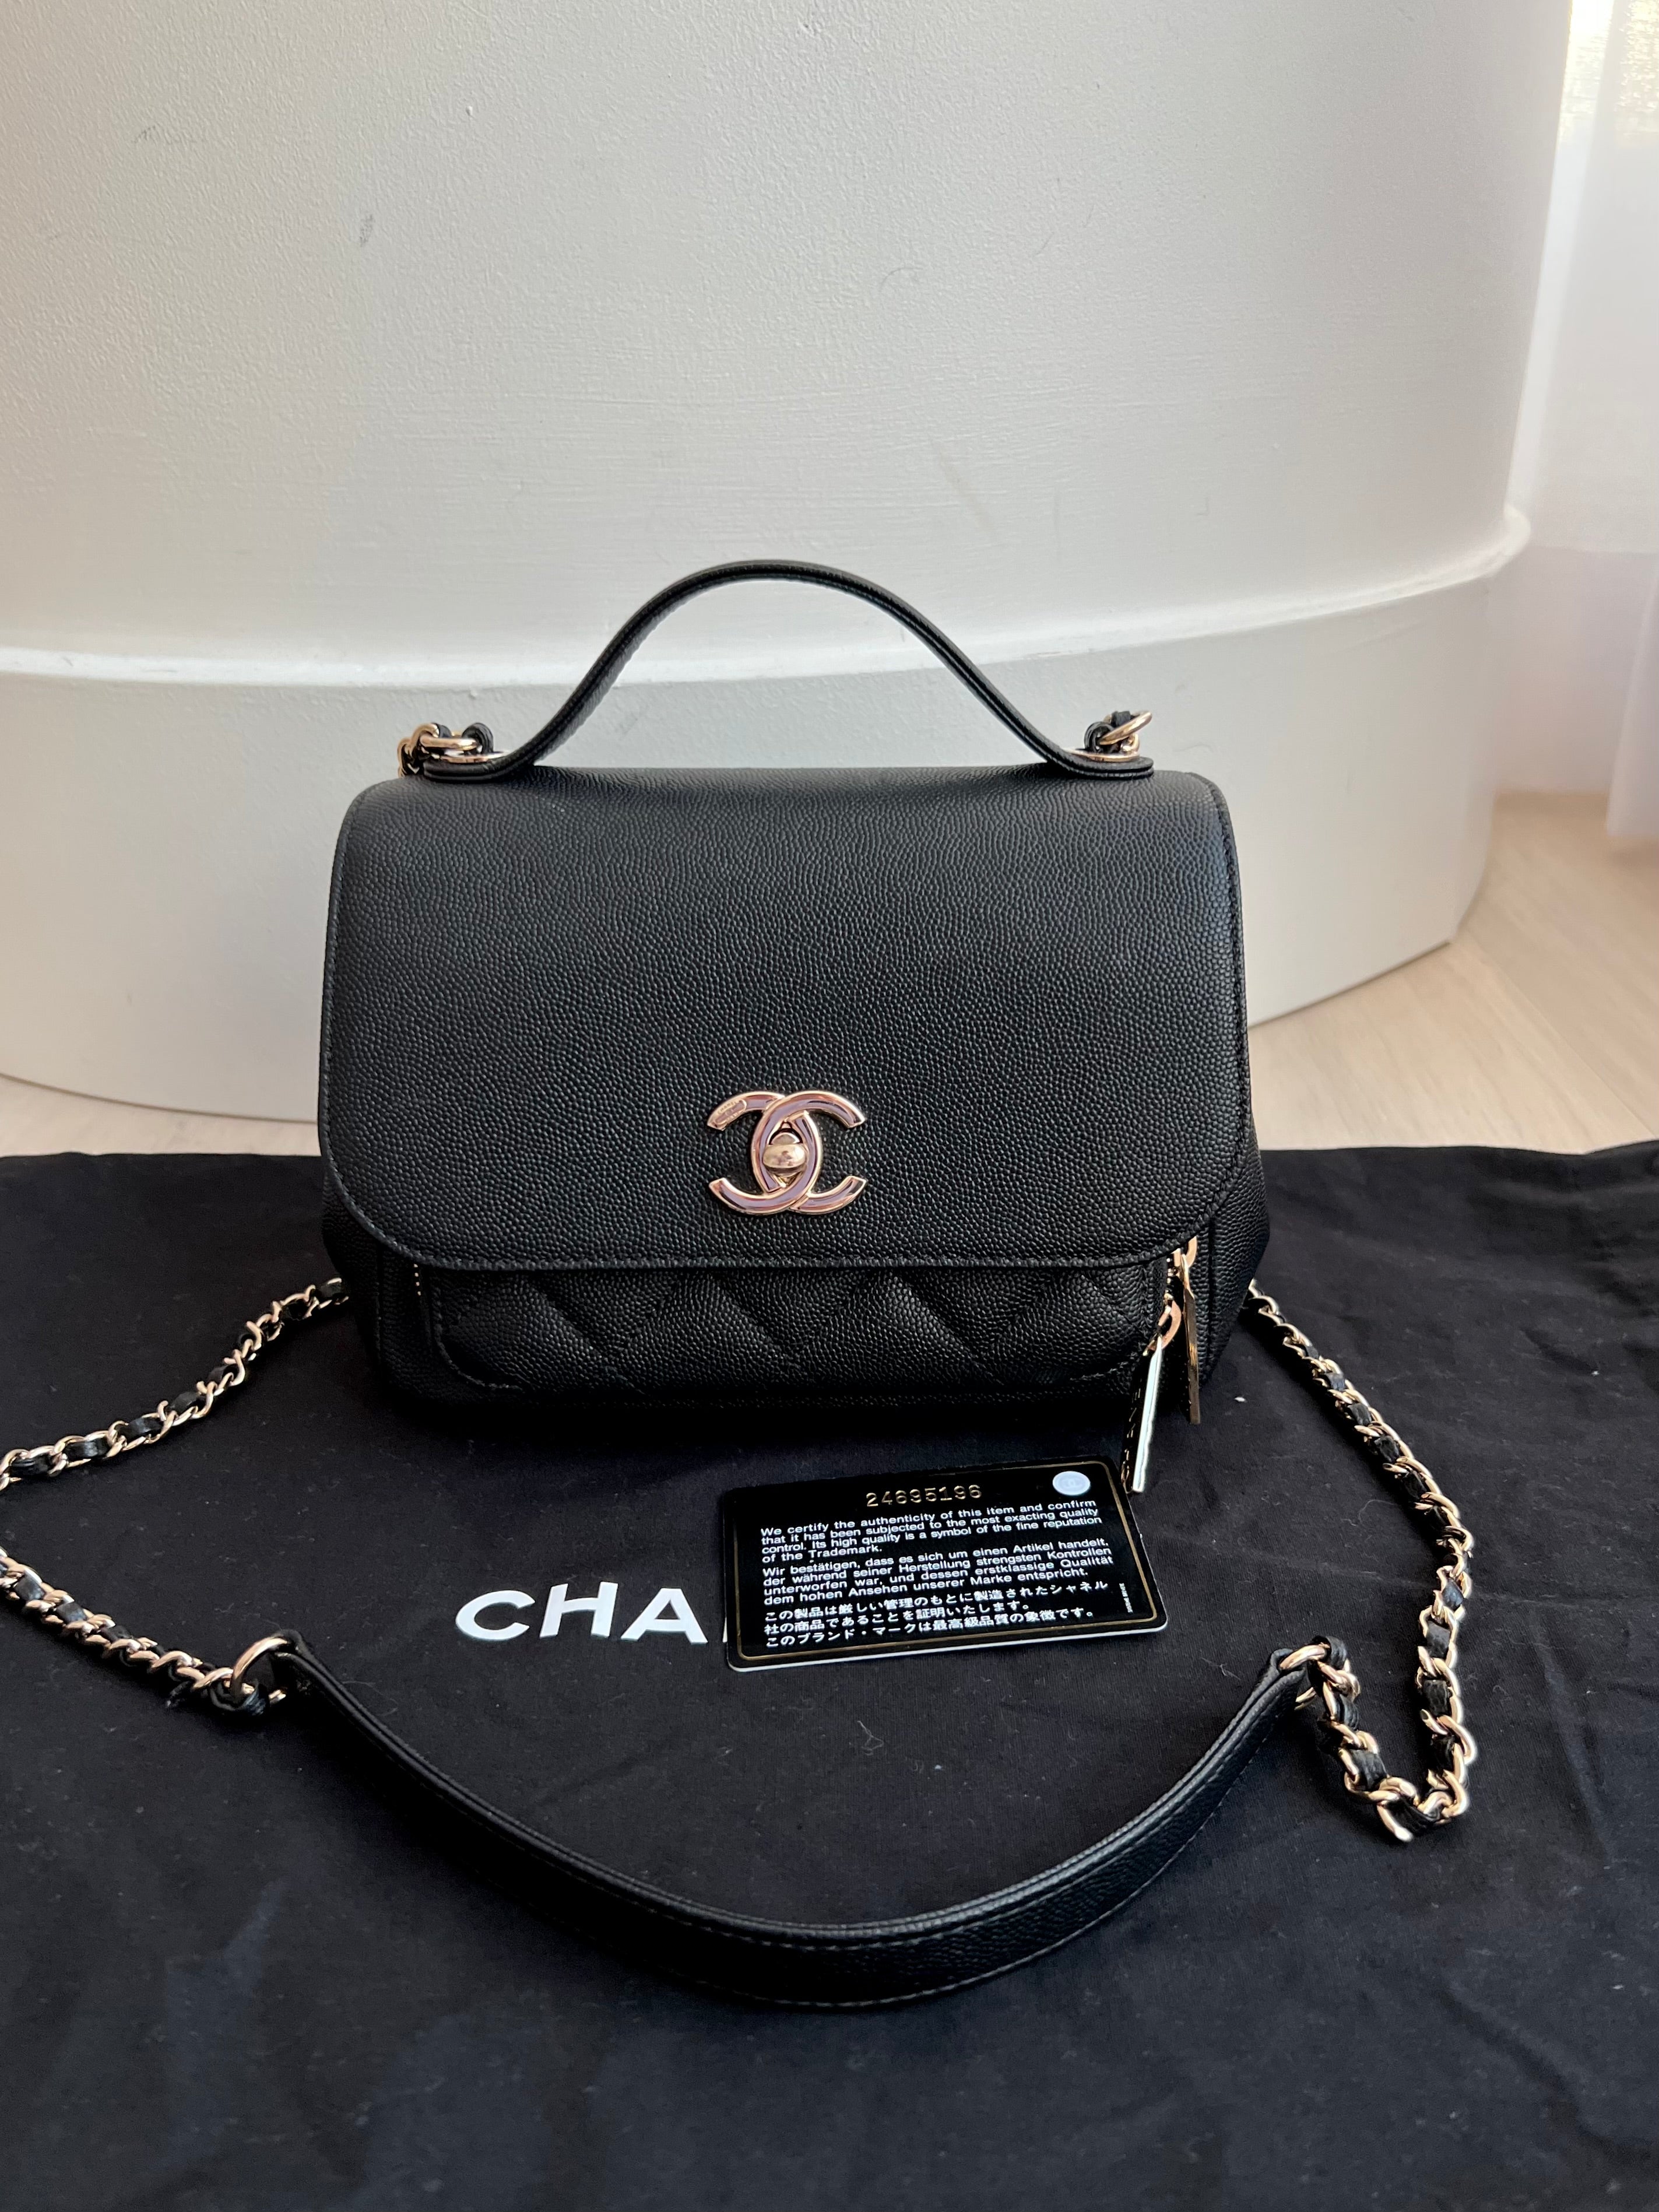 Chanel Business Affinity Bag – Beccas Bags Boutique